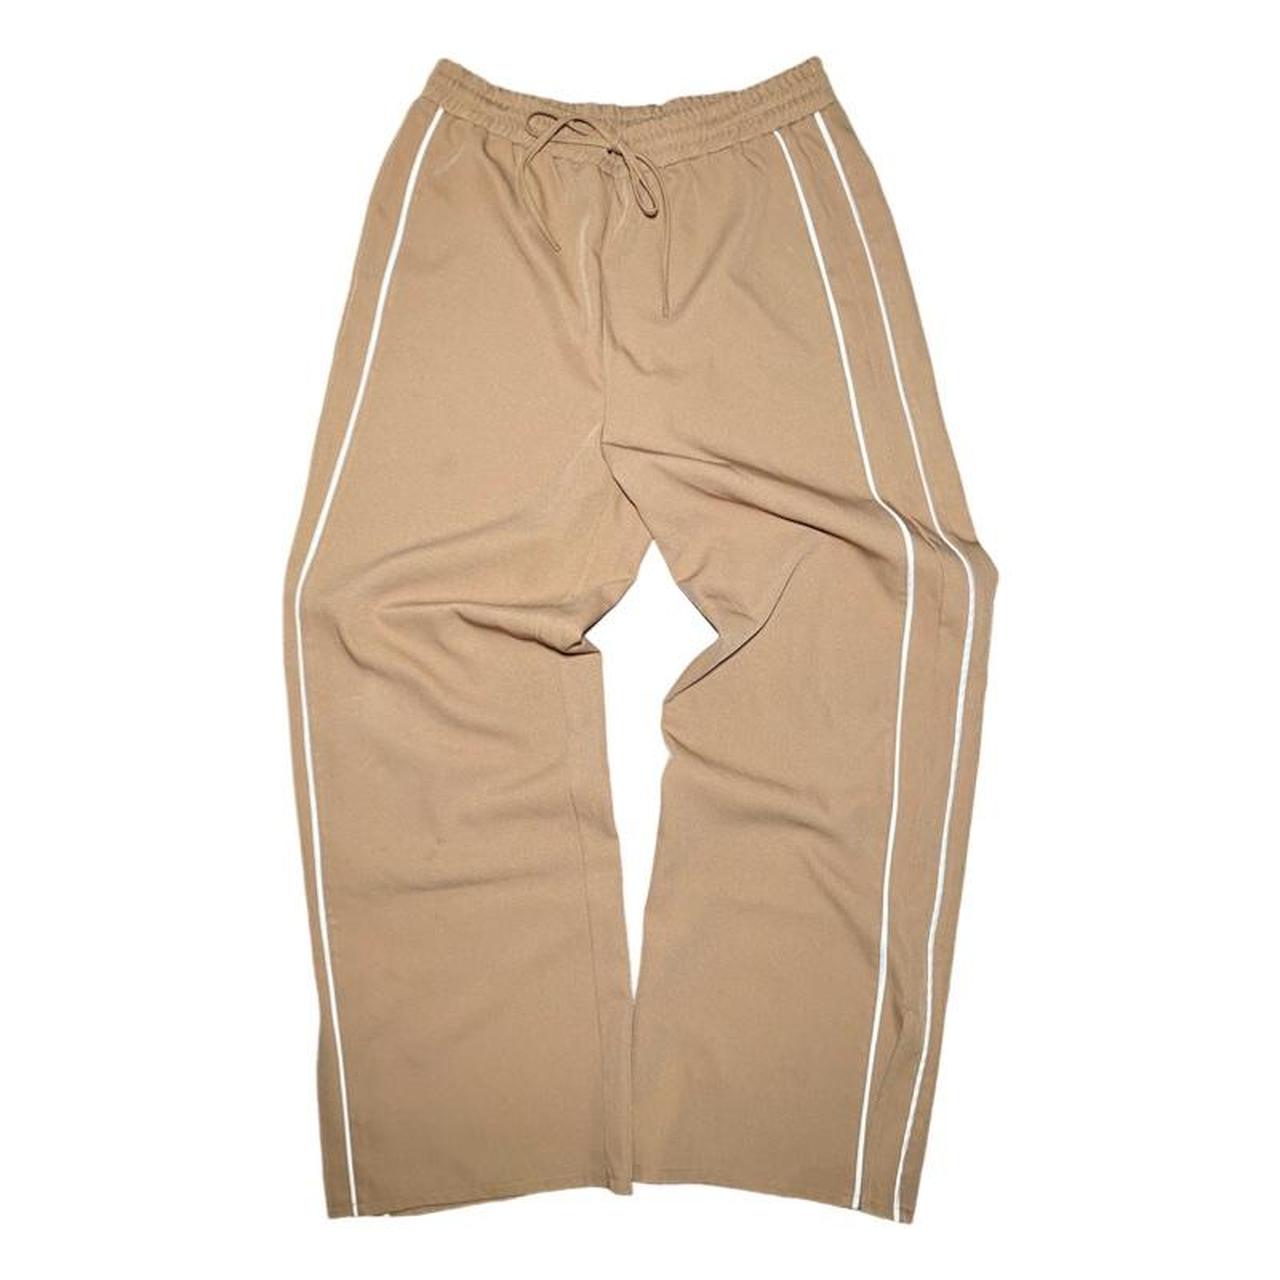 Womens Oke Pink Multi Drawstring Cargo Sweatpants Women Thick Track Bottoms  For Streetwear, Hip Hop, And Winter Capris From Blossommg, $28.36 |  DHgate.Com